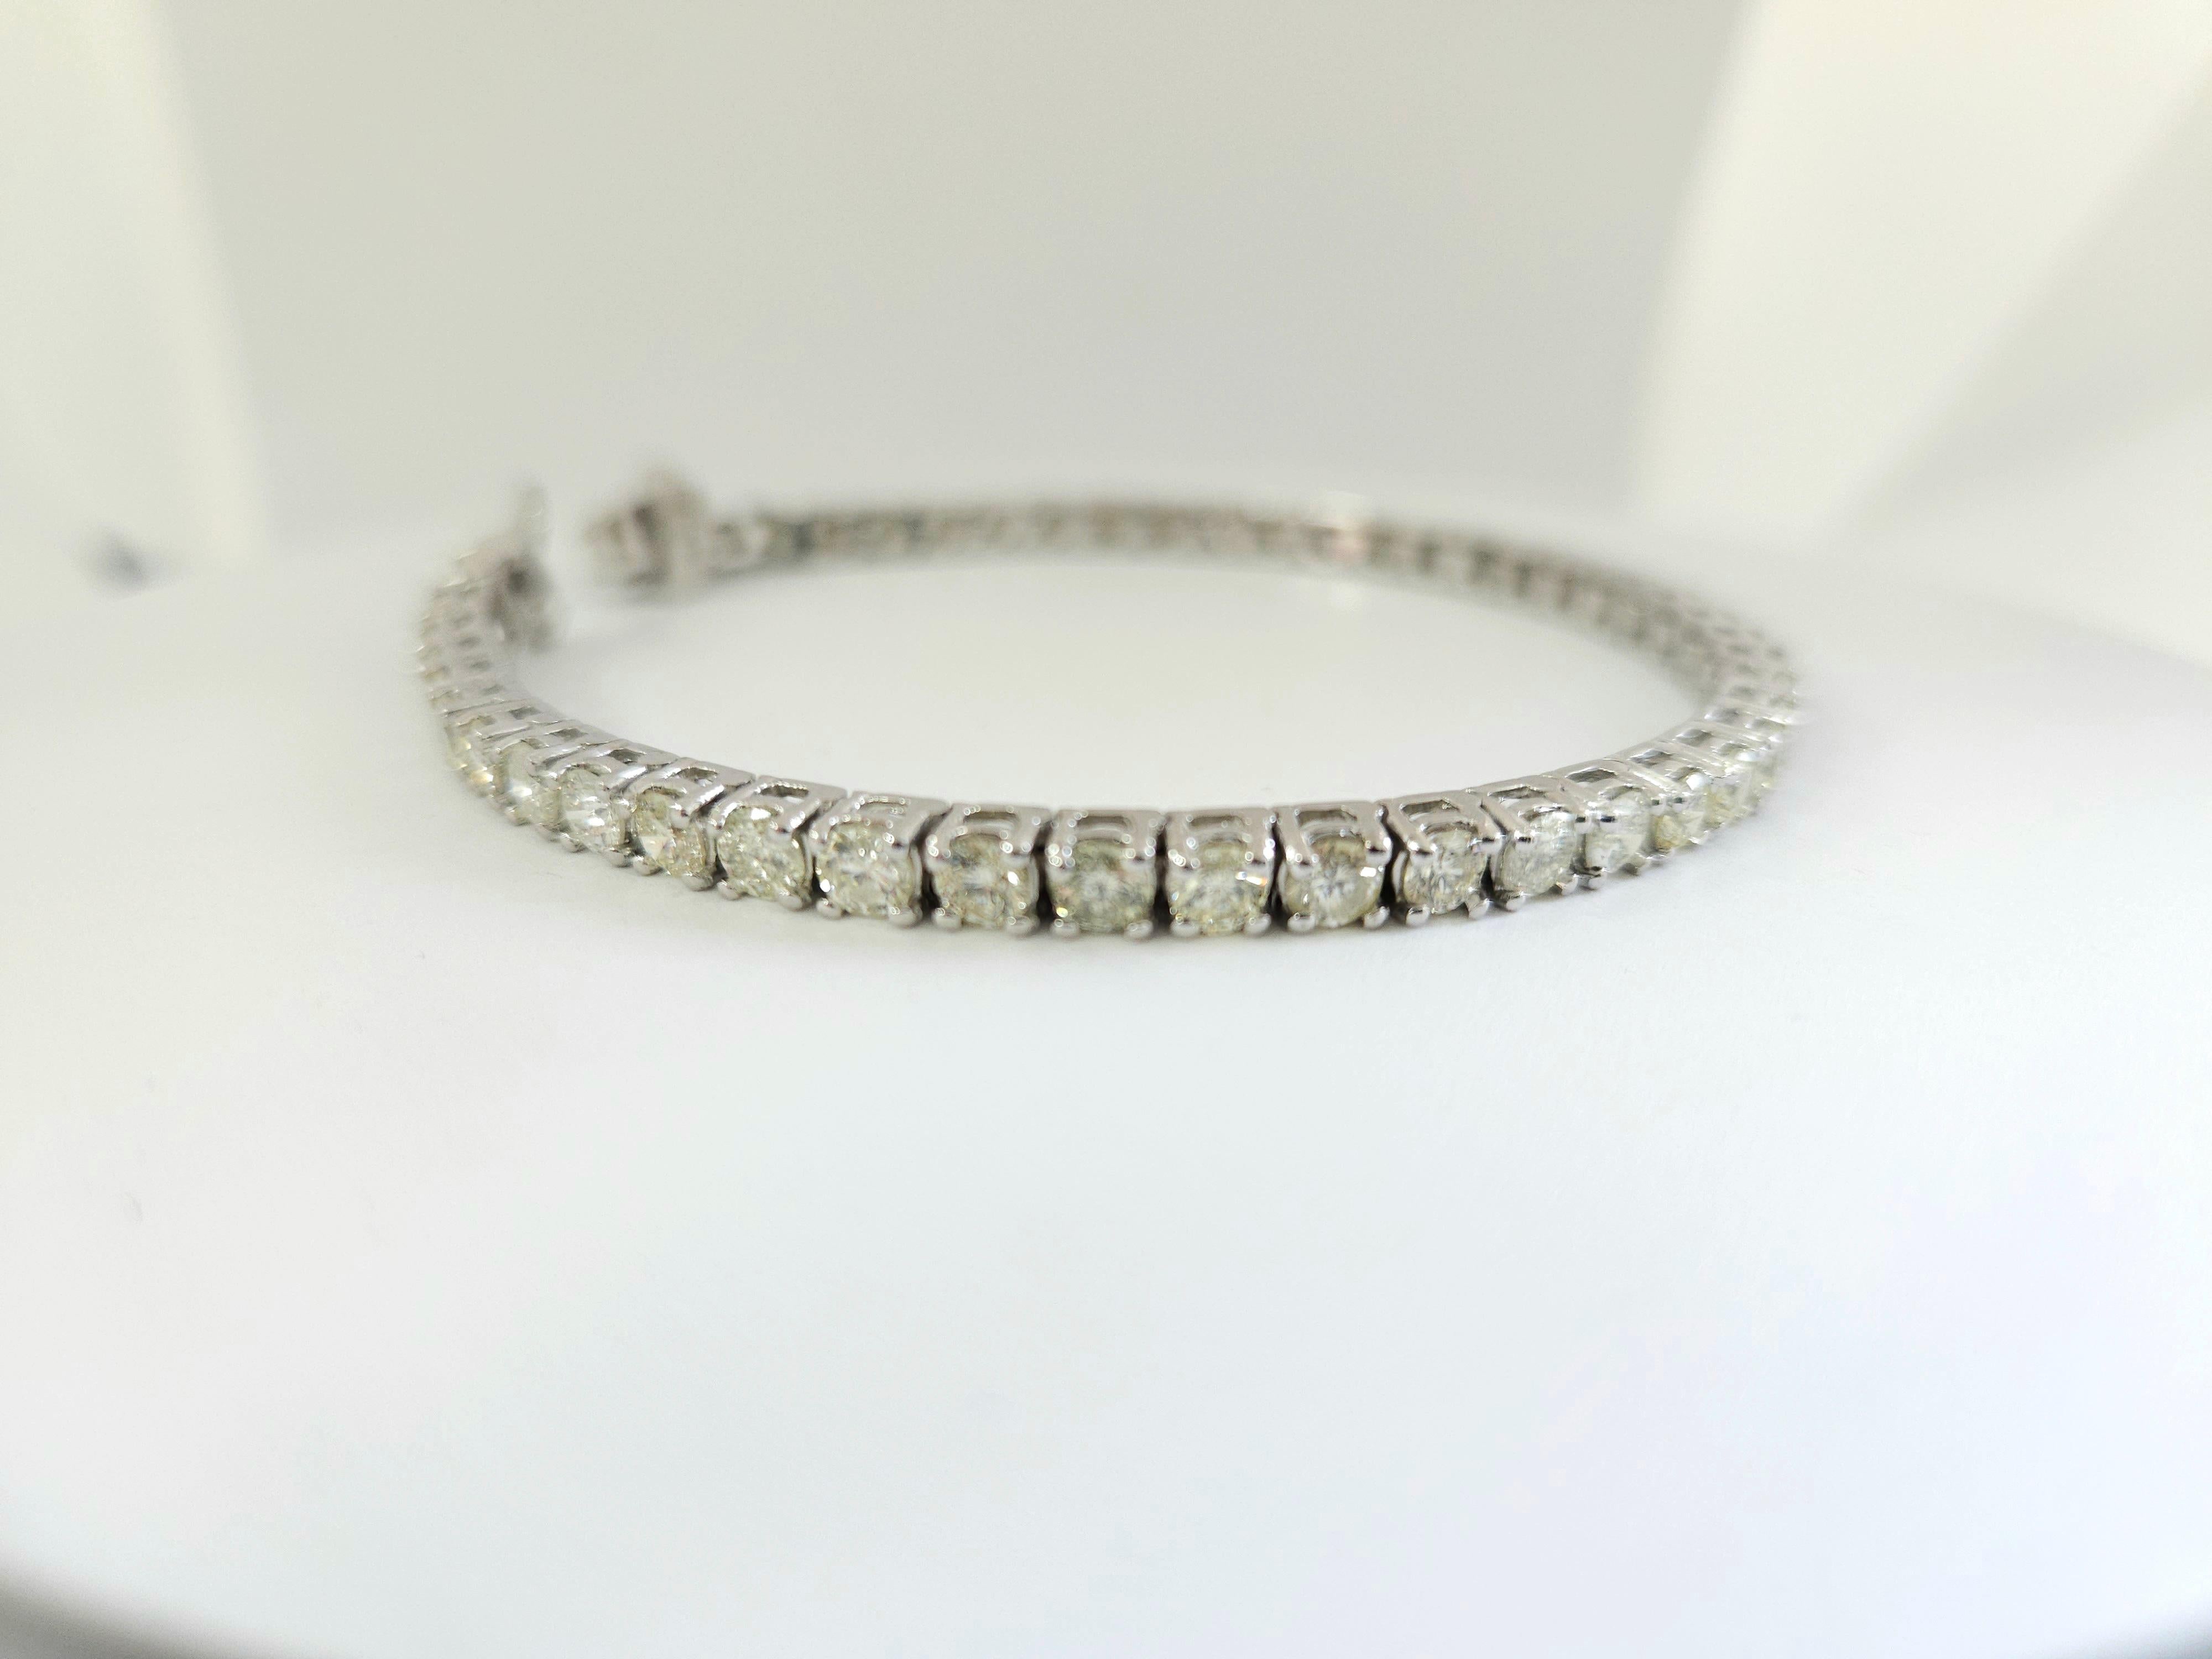 Natural diamonds tennis bracelet round-brilliant cut  14k white gold. 
7 inch. Average Color I, Clarity I 3.70 mm wide,48 pcs, 14.22 grams very shiny don't miss.

*Free shipping within U.S*

